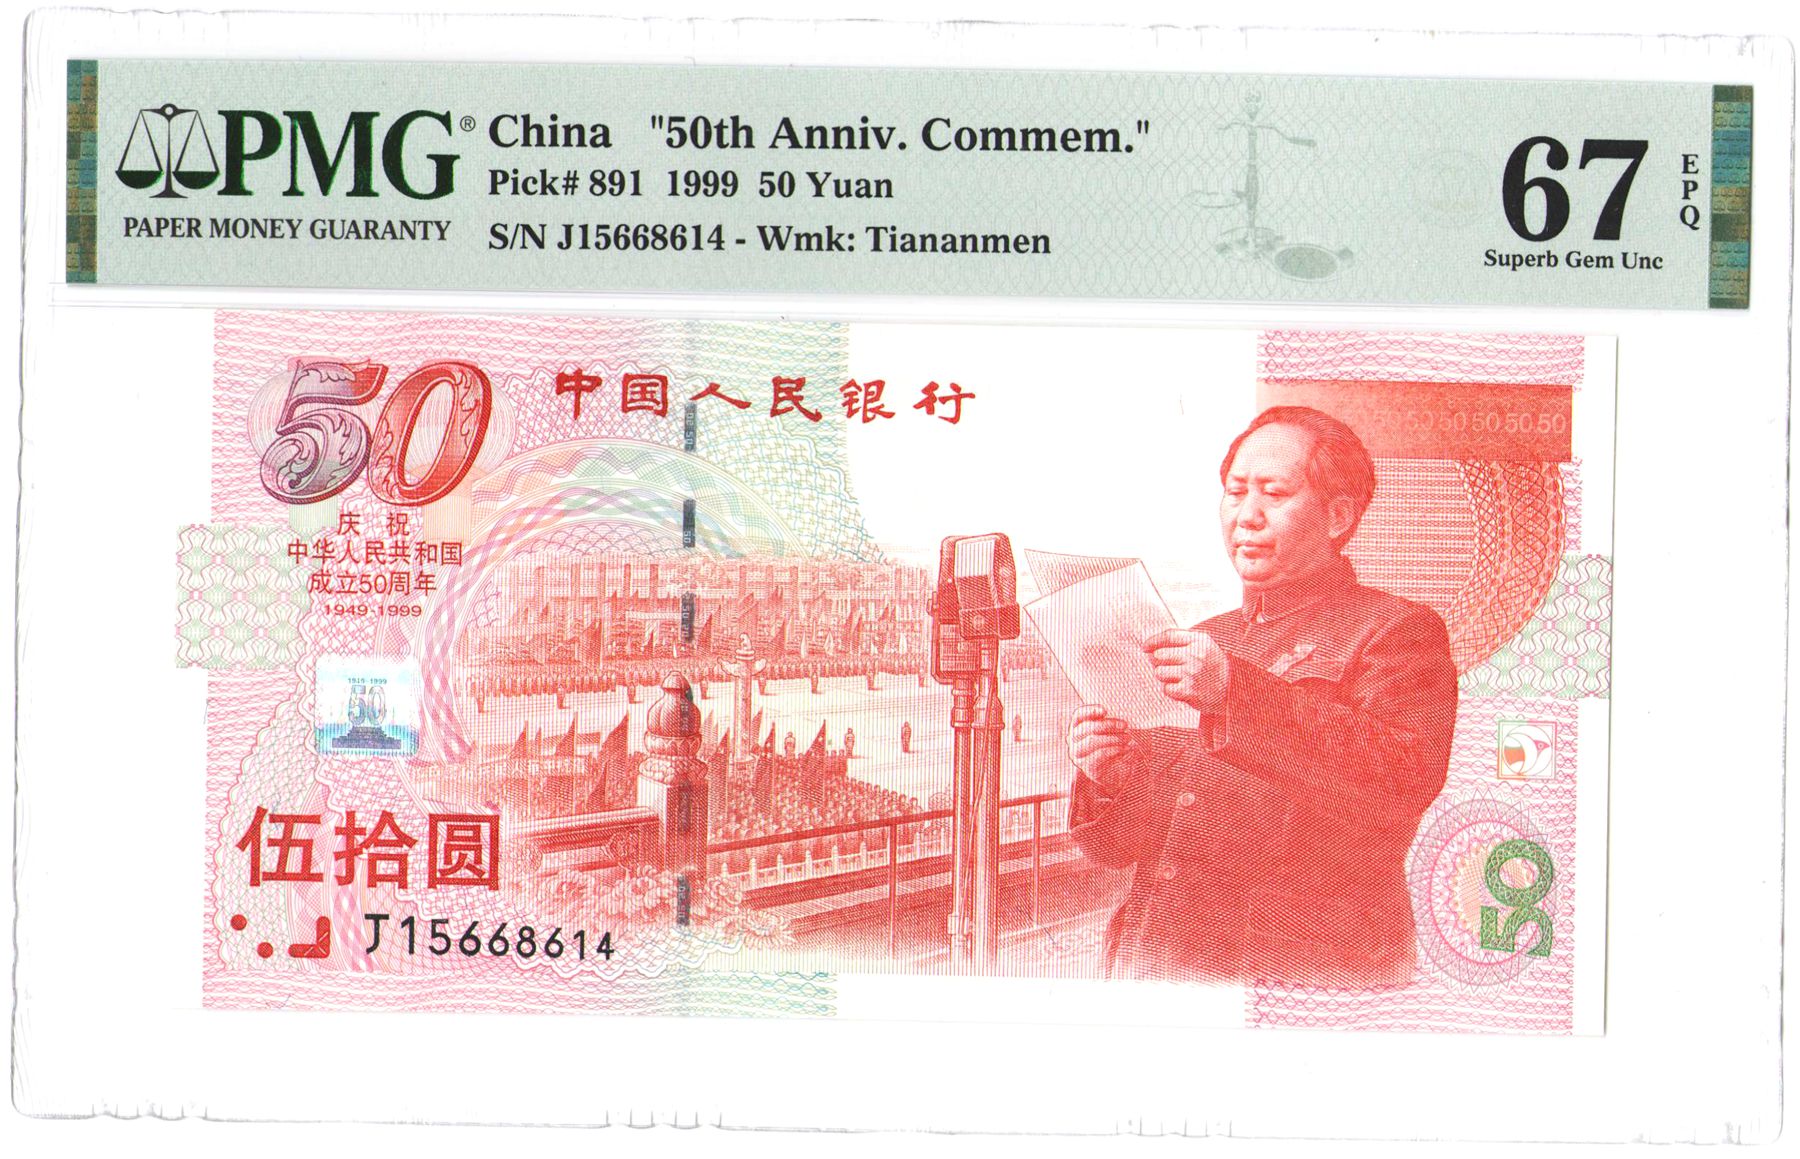 N0151, PMG67, China First Commemorative Banknote Paper Money 50 Yuan,1999, P-891